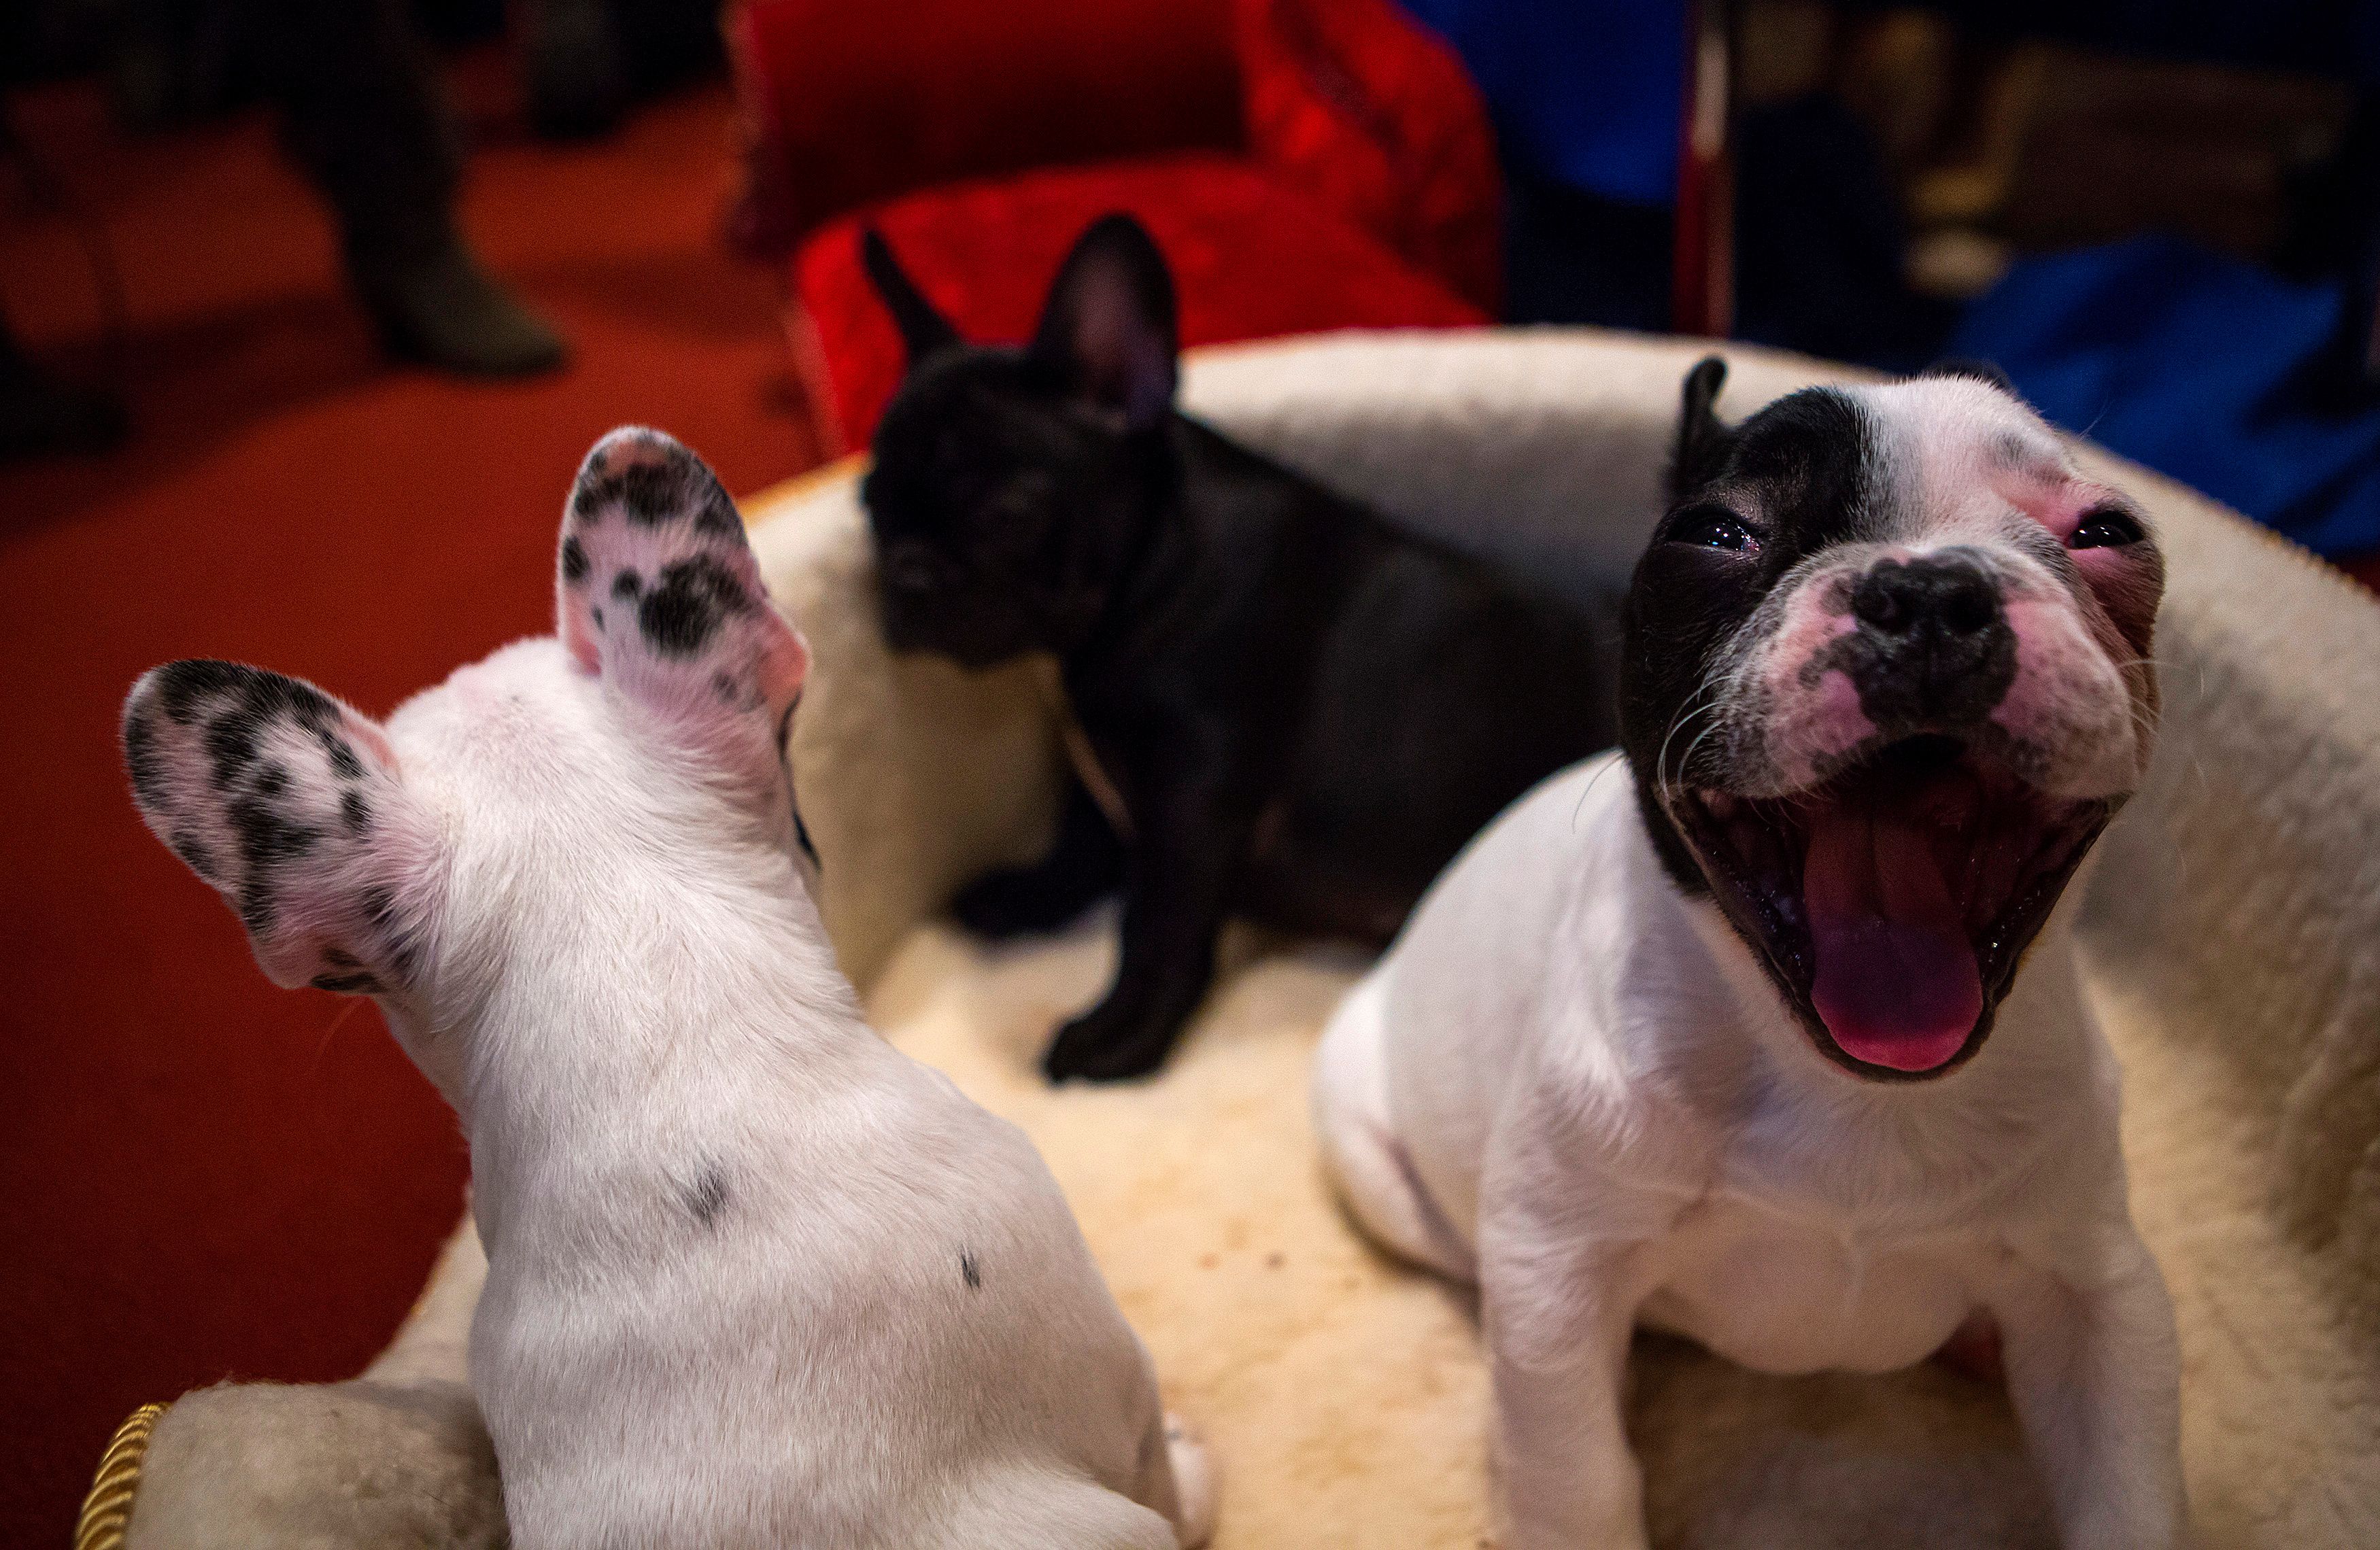 Doggy capitalism: How the French bulldog's popularity exposes the